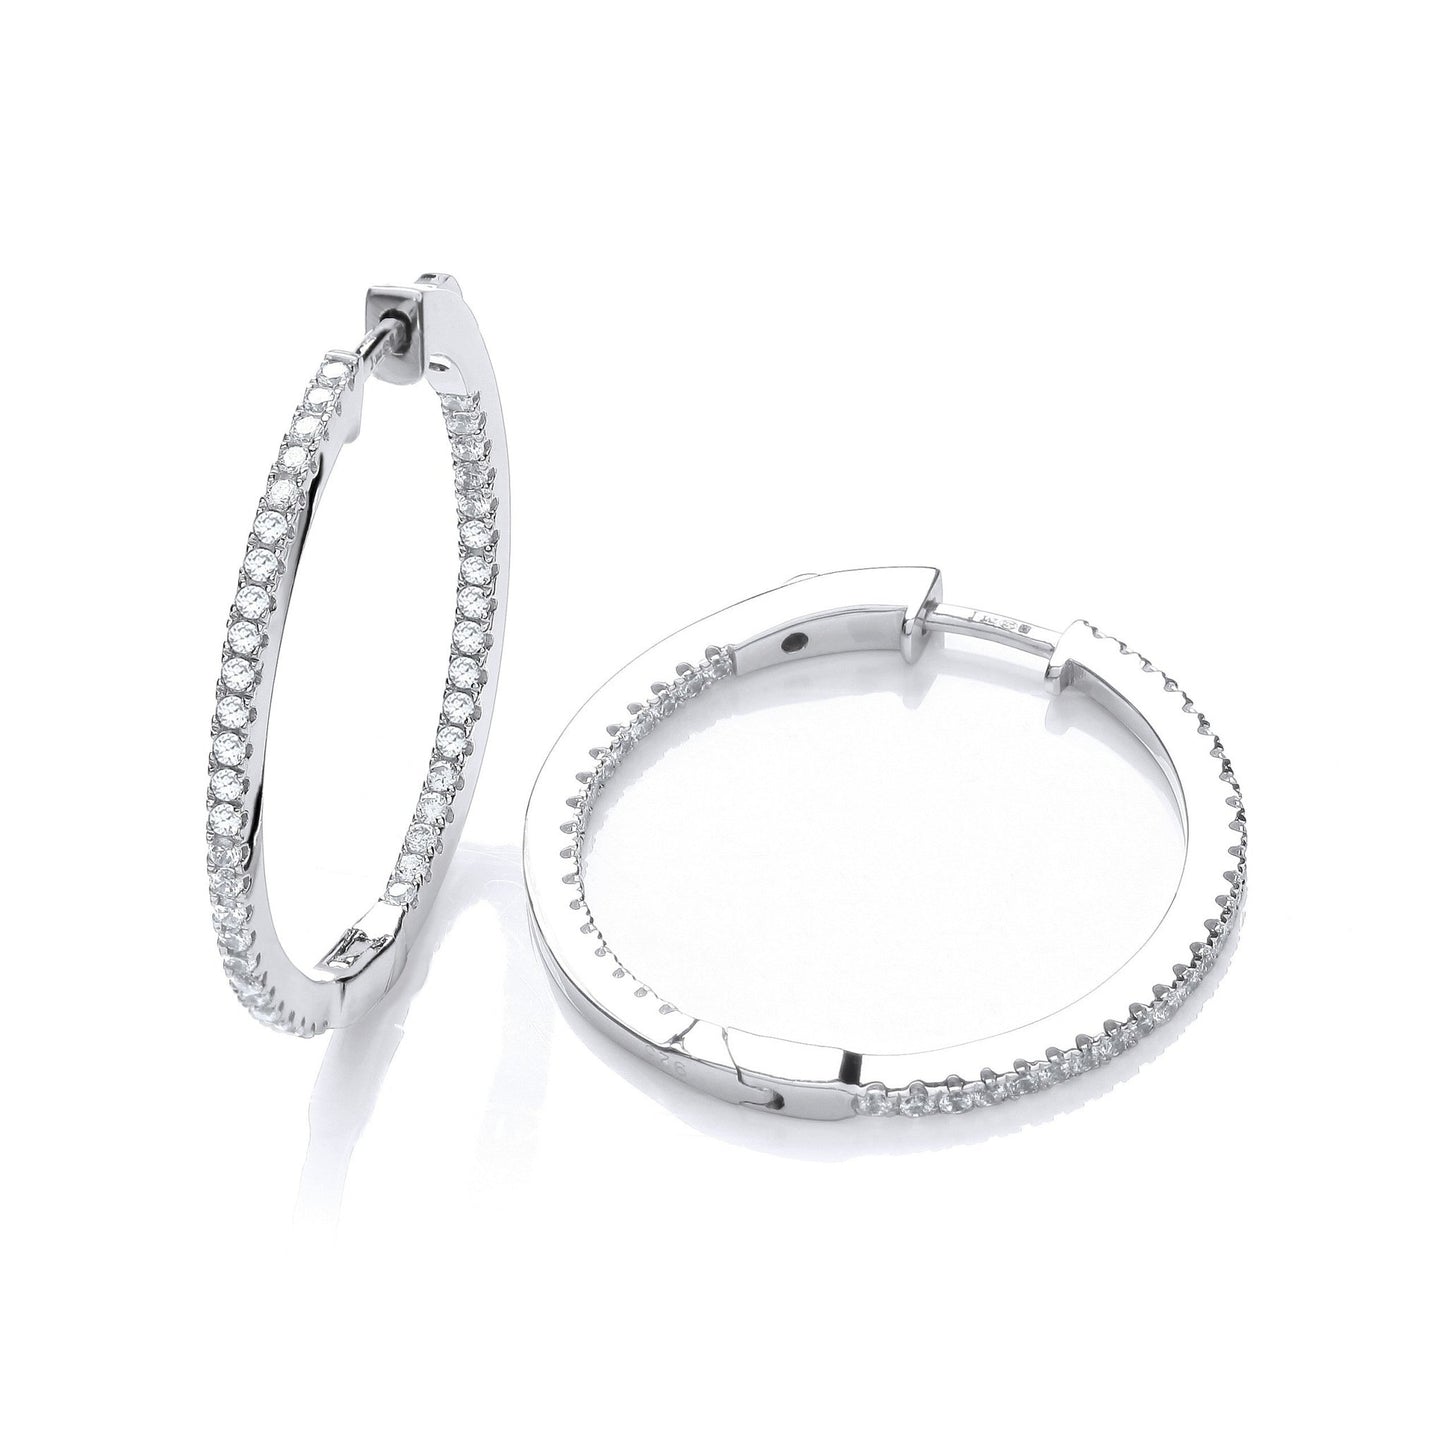 Hoop 925 Sterling Silver Earrings Set With a row CZs - FJewellery